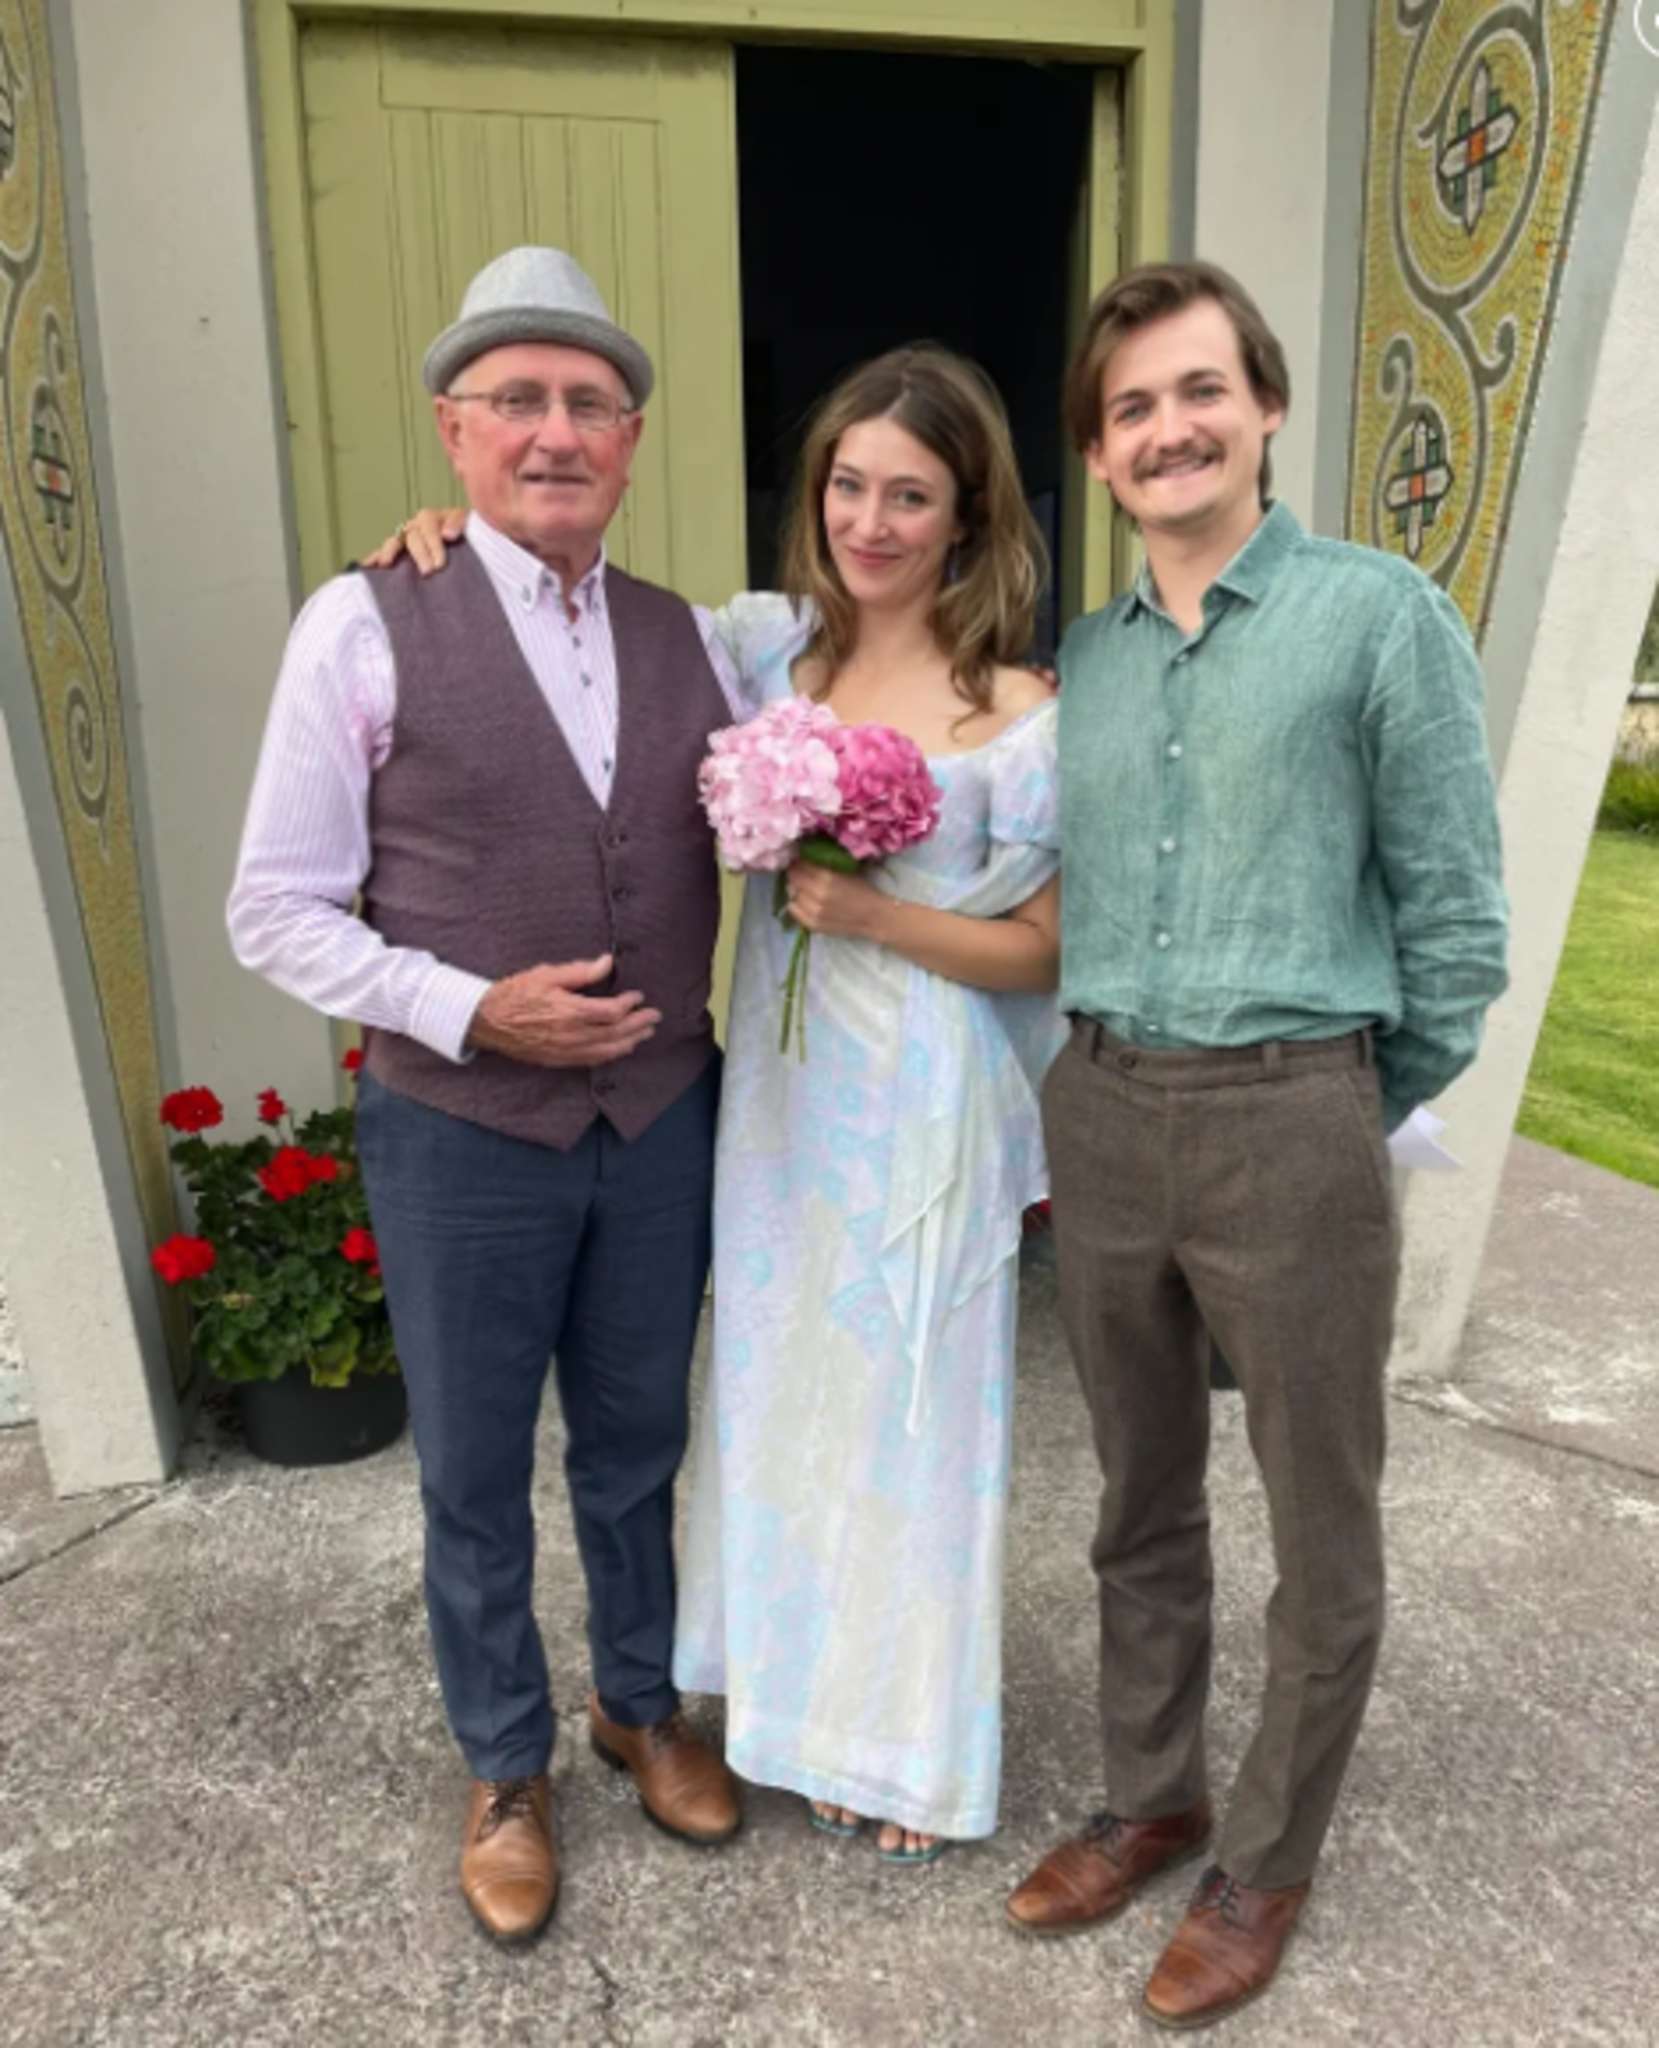 During A Non-Traditional Ceremony, Jack Gleeson And Róisn O'Mahony Were Wed